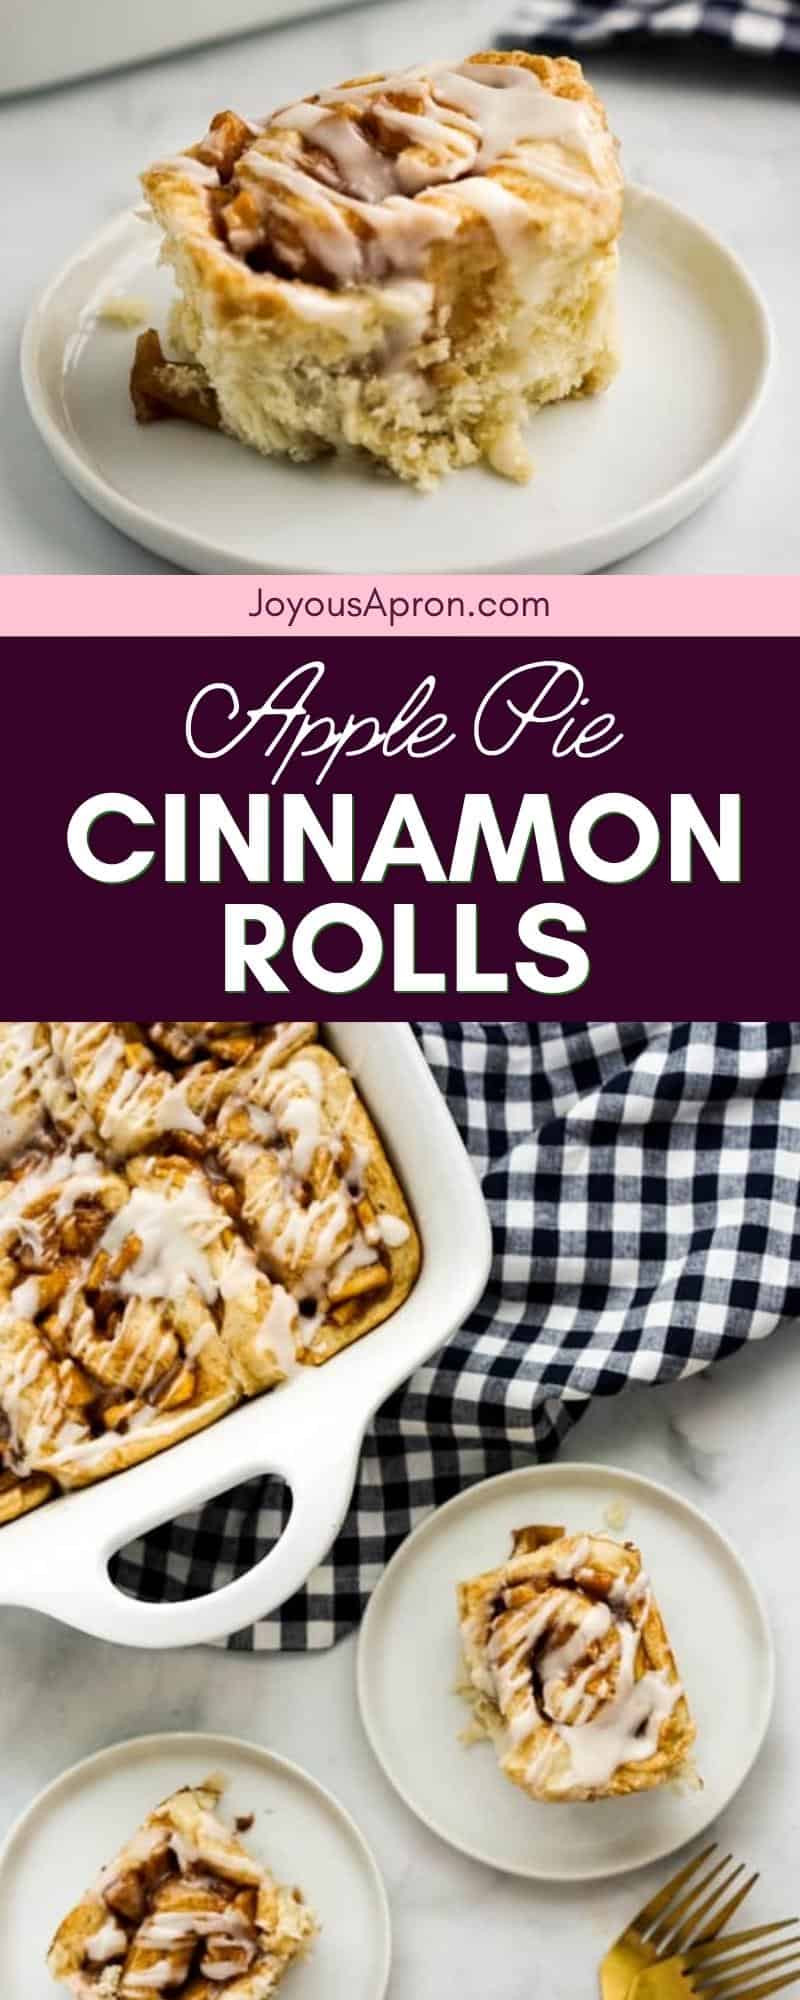 Cinnamon Rolls with Apple Pie Filling - Next-level Cinnamon Rolls! Soft and fluffy rolls filled with apple pie filling, topped with a sticky sweet glaze. Perfect for holiday brunch and breakfast! via @joyousapron